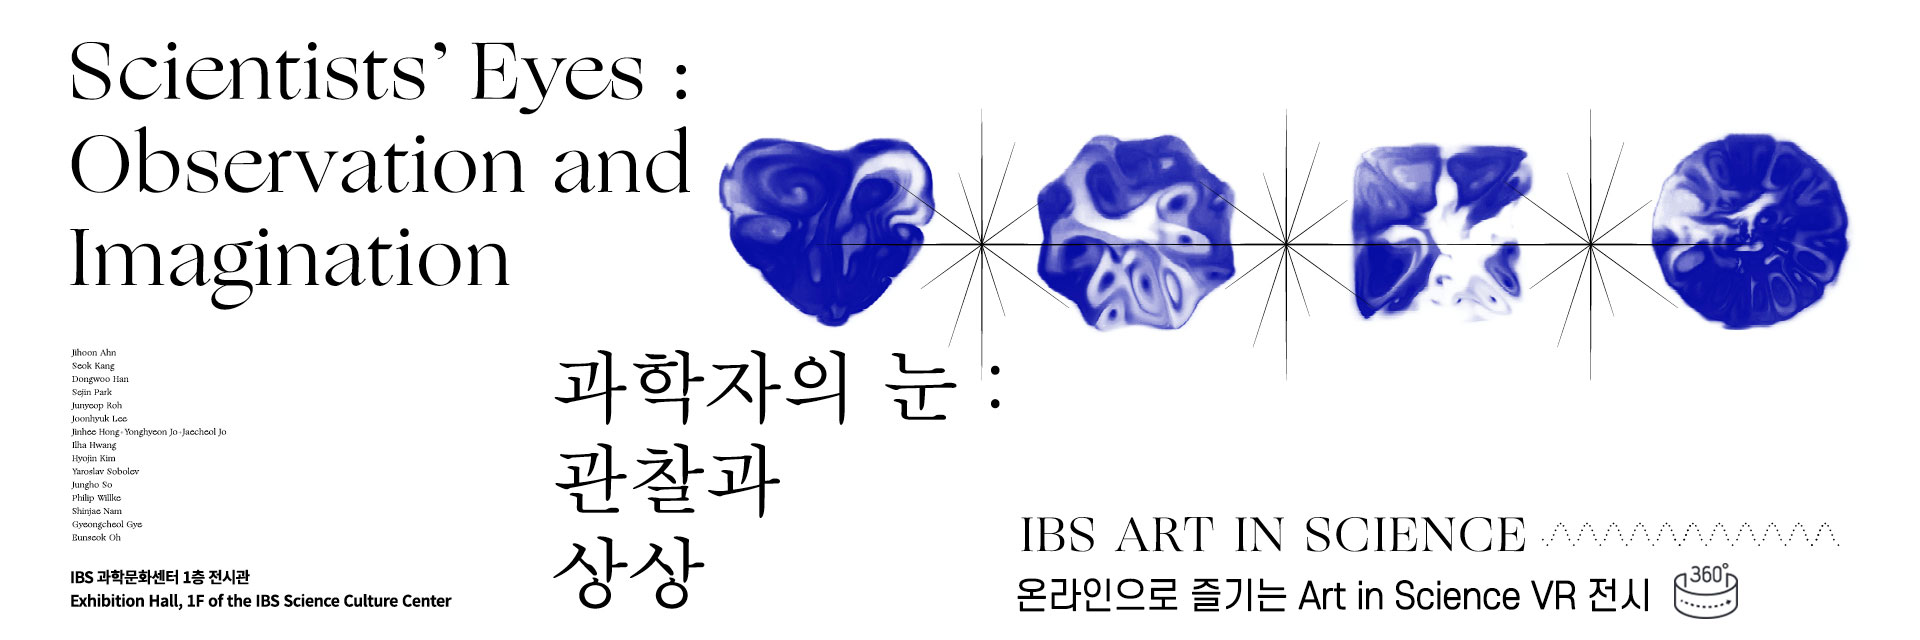 Scientists' Eyes Observation and Imagination 과학자의눈 : 관찰과 상상 IBS ART IN SCIENCE 온라인으로 즐기는 Art in Science VR 전시 IBS 과학문화센터 1층 전시관 Exhibition Hall, 1F of the IBS Science Culture Center